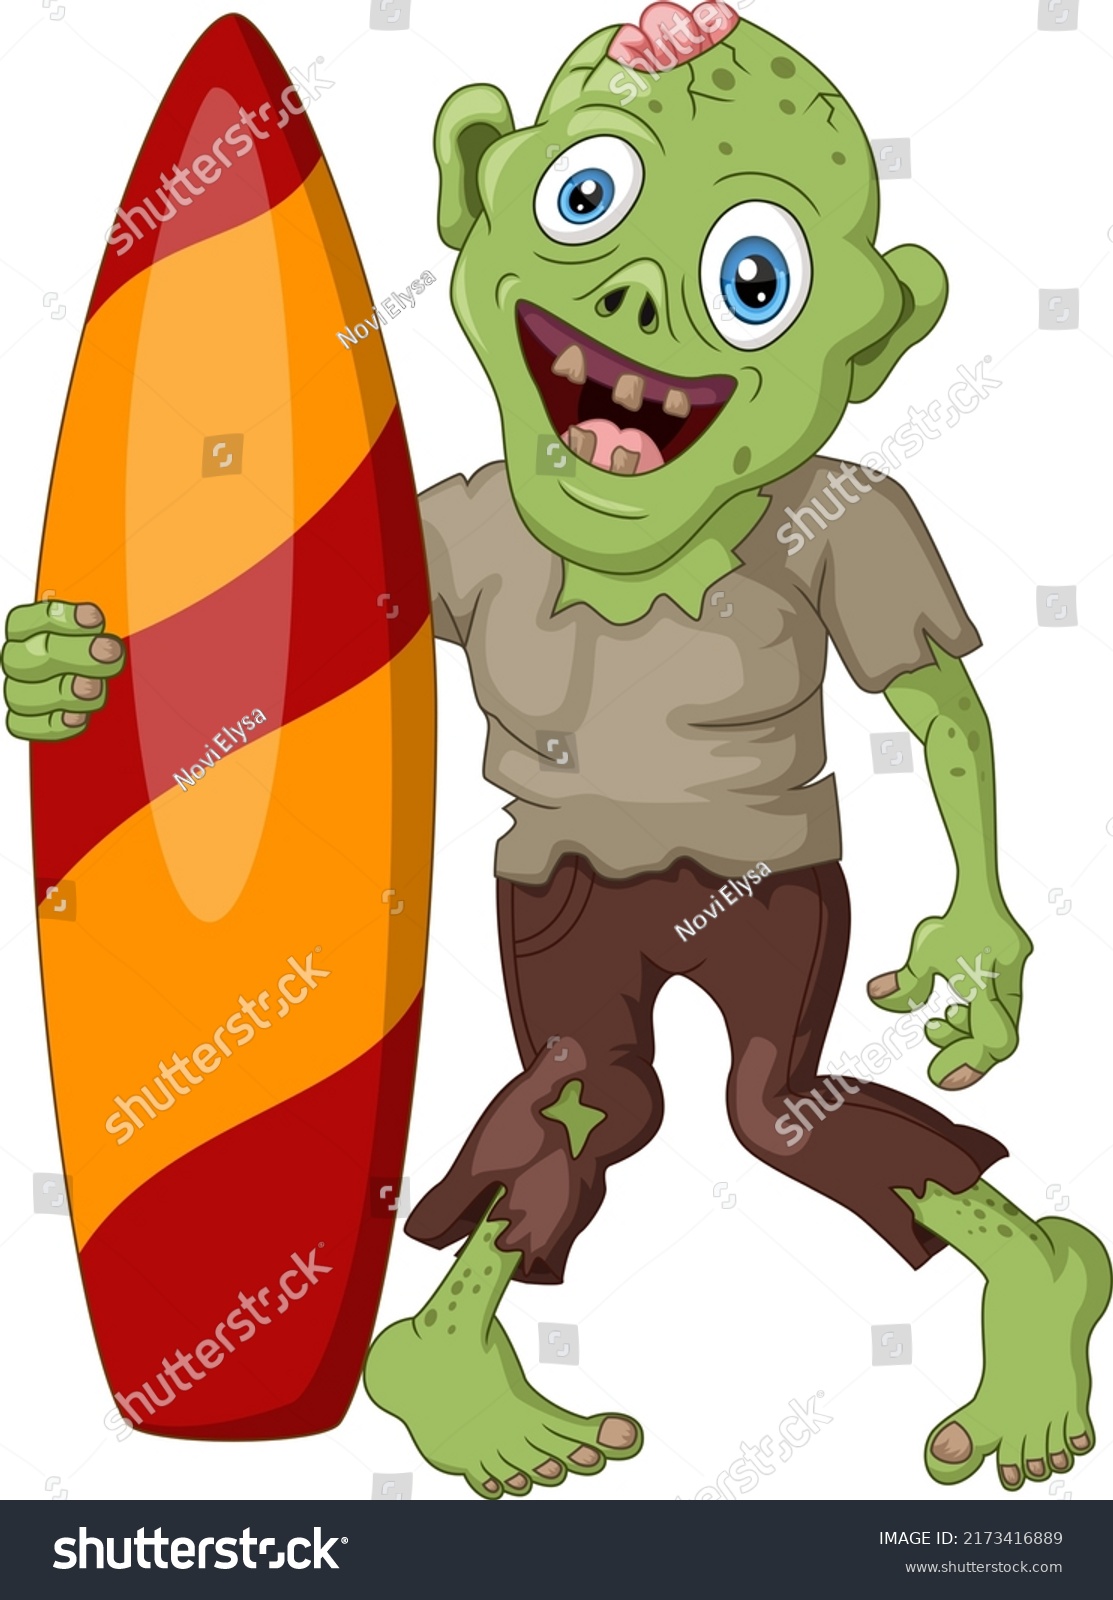 SVG of Creepy zombie cartoon holding a surfboard svg